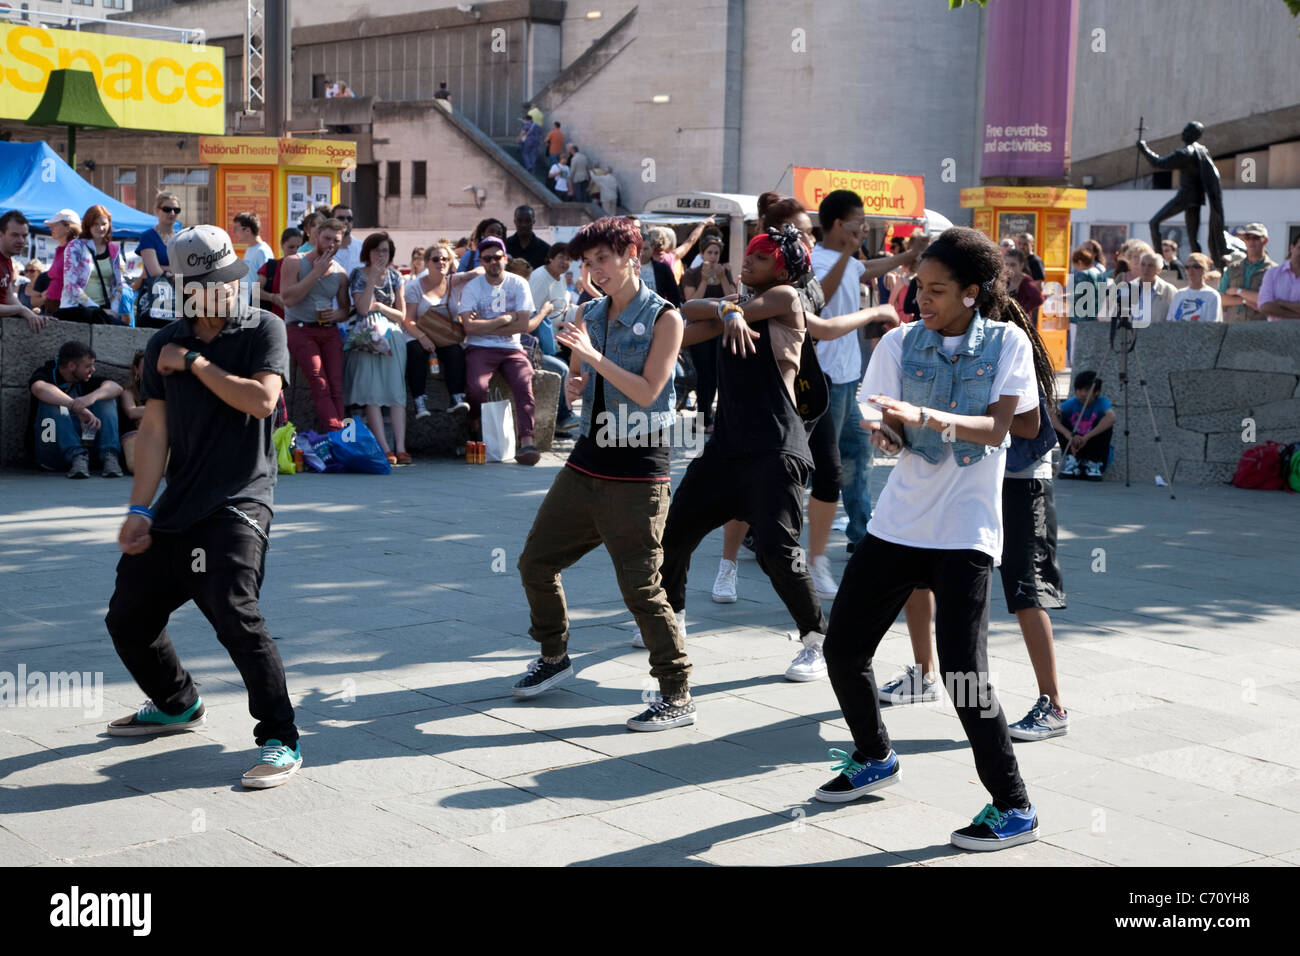 Street Dance outside the National Theatre, South Bank, London, England, UK Stock Photo